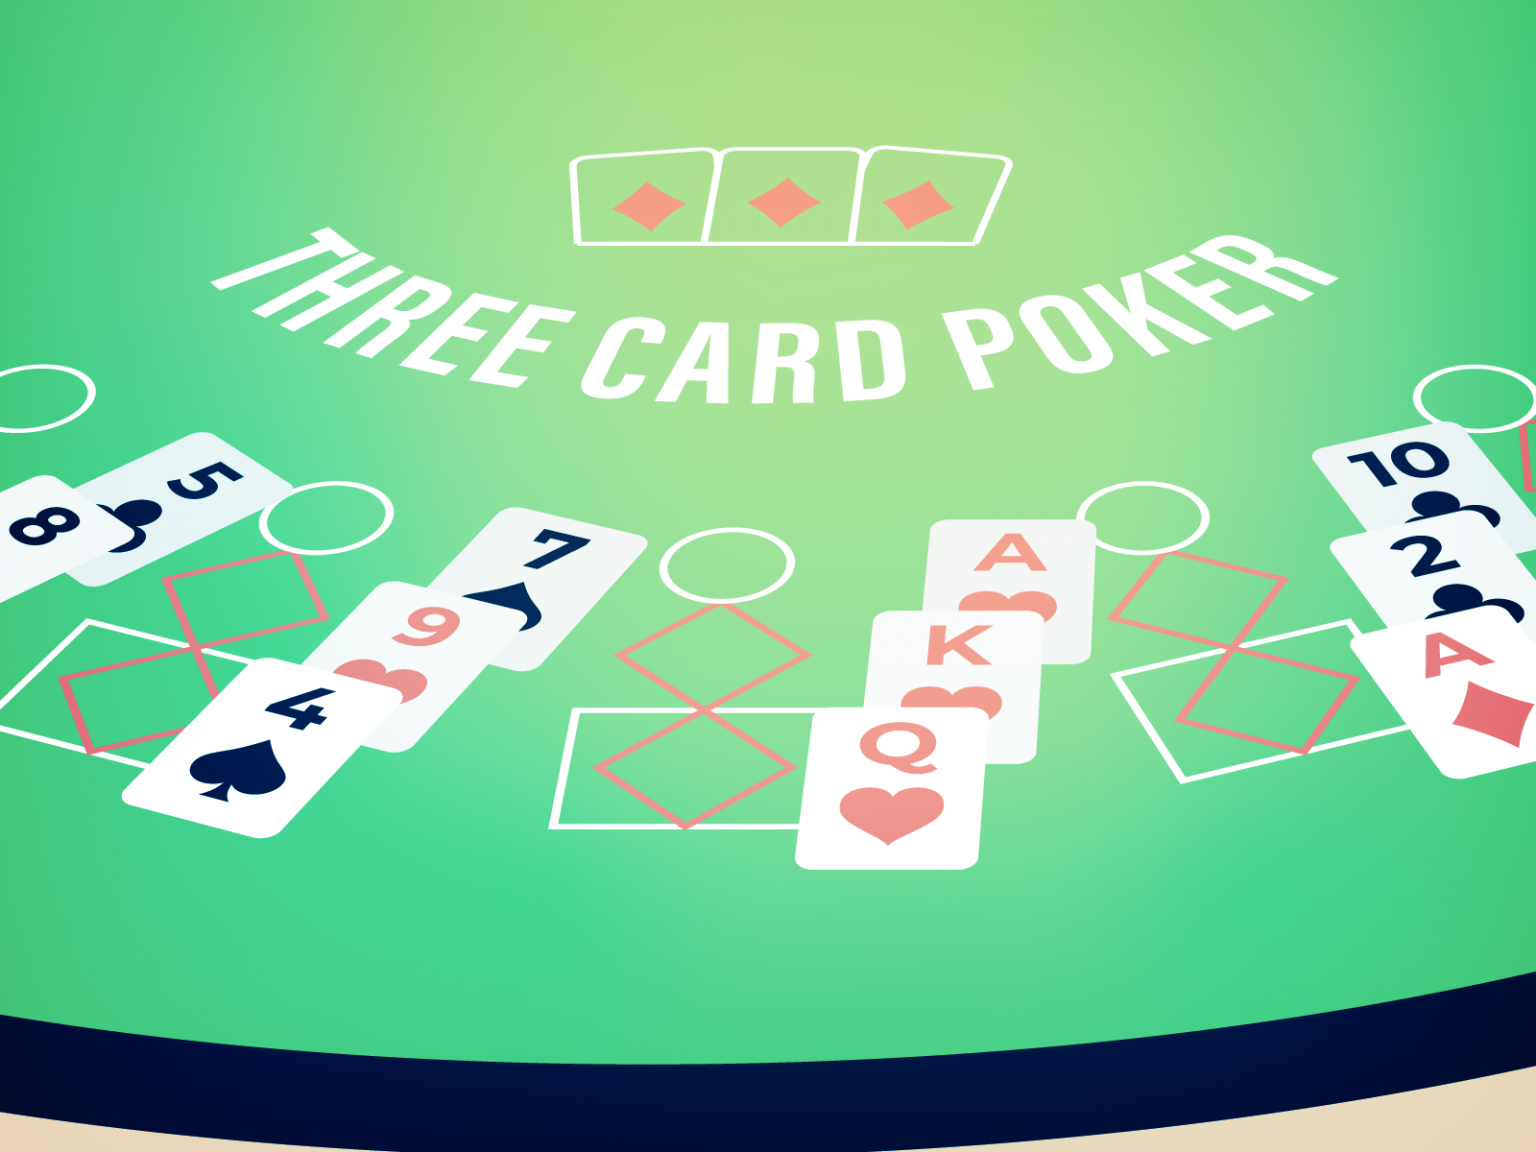 3 Cards Poker Rules